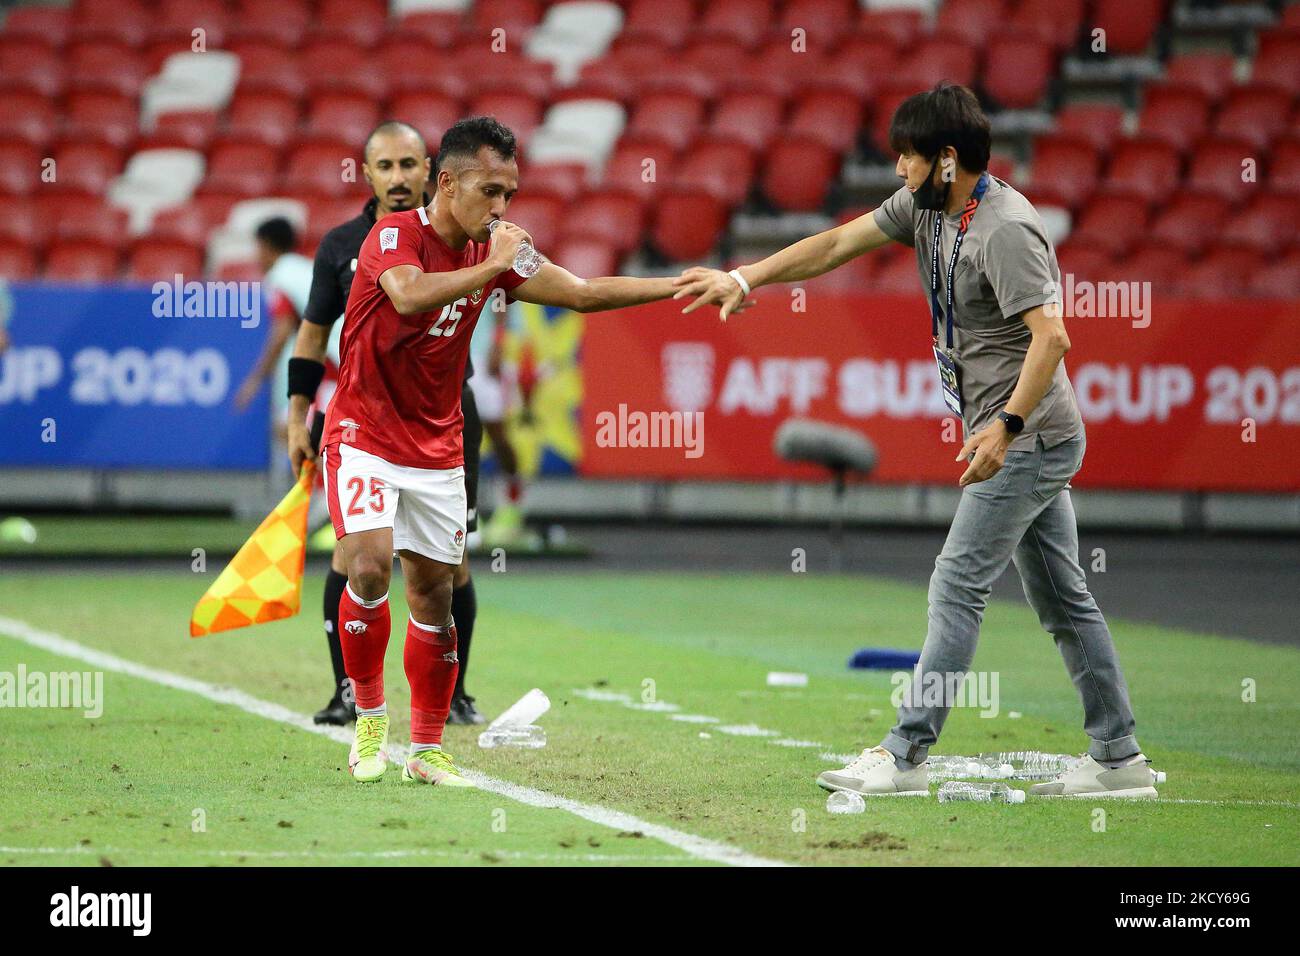 Indonesia head coach, Shin Tae Yong (R) congratulates Irfan Samaling Kumi after scoring the second goal during the AFF Suzuki Cup 2020 Group B match between Malaysia and Indonesia at National Stadium on December 19, 2021 in Singapore. (Photo by Suhaimi Abdullah/NurPhoto) Stock Photo